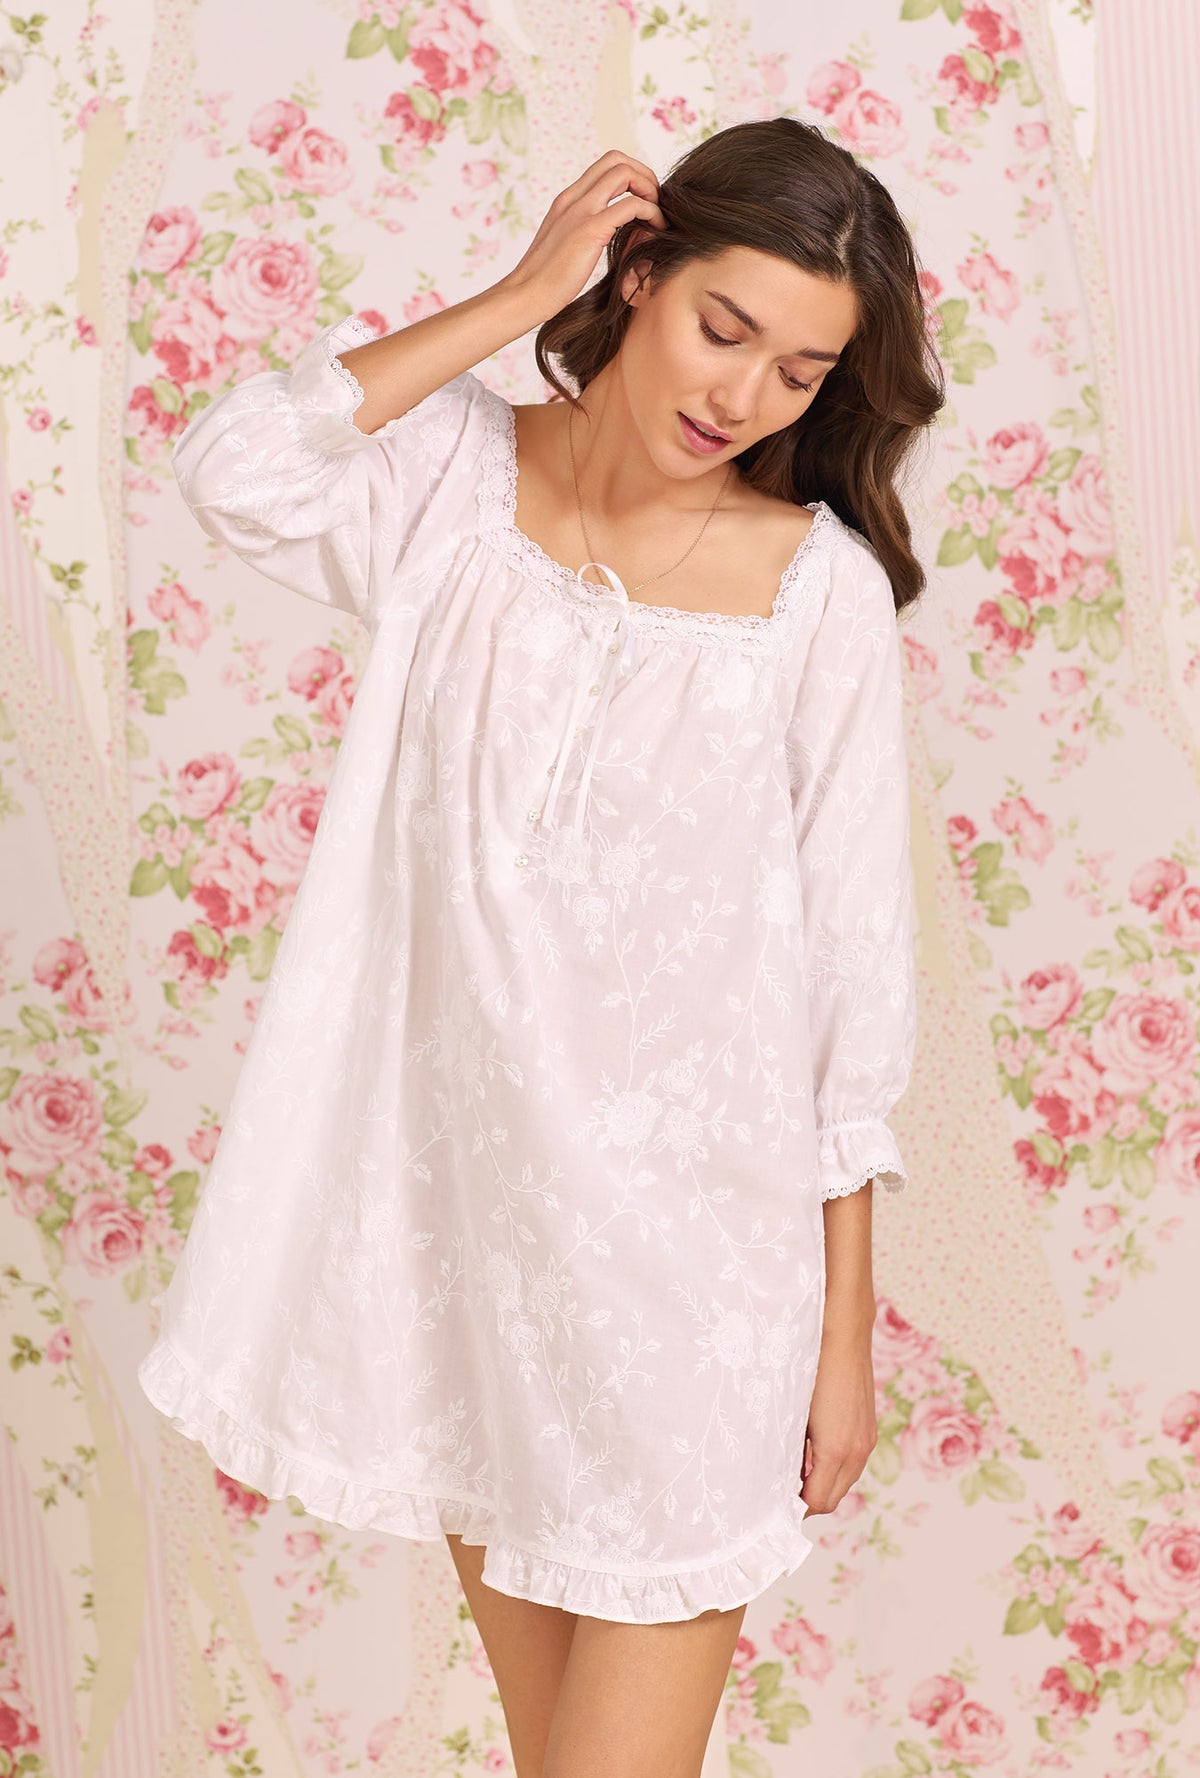 A lady wearing white short sleeve Cotton Nightshirt with Dreamy Embroidered print